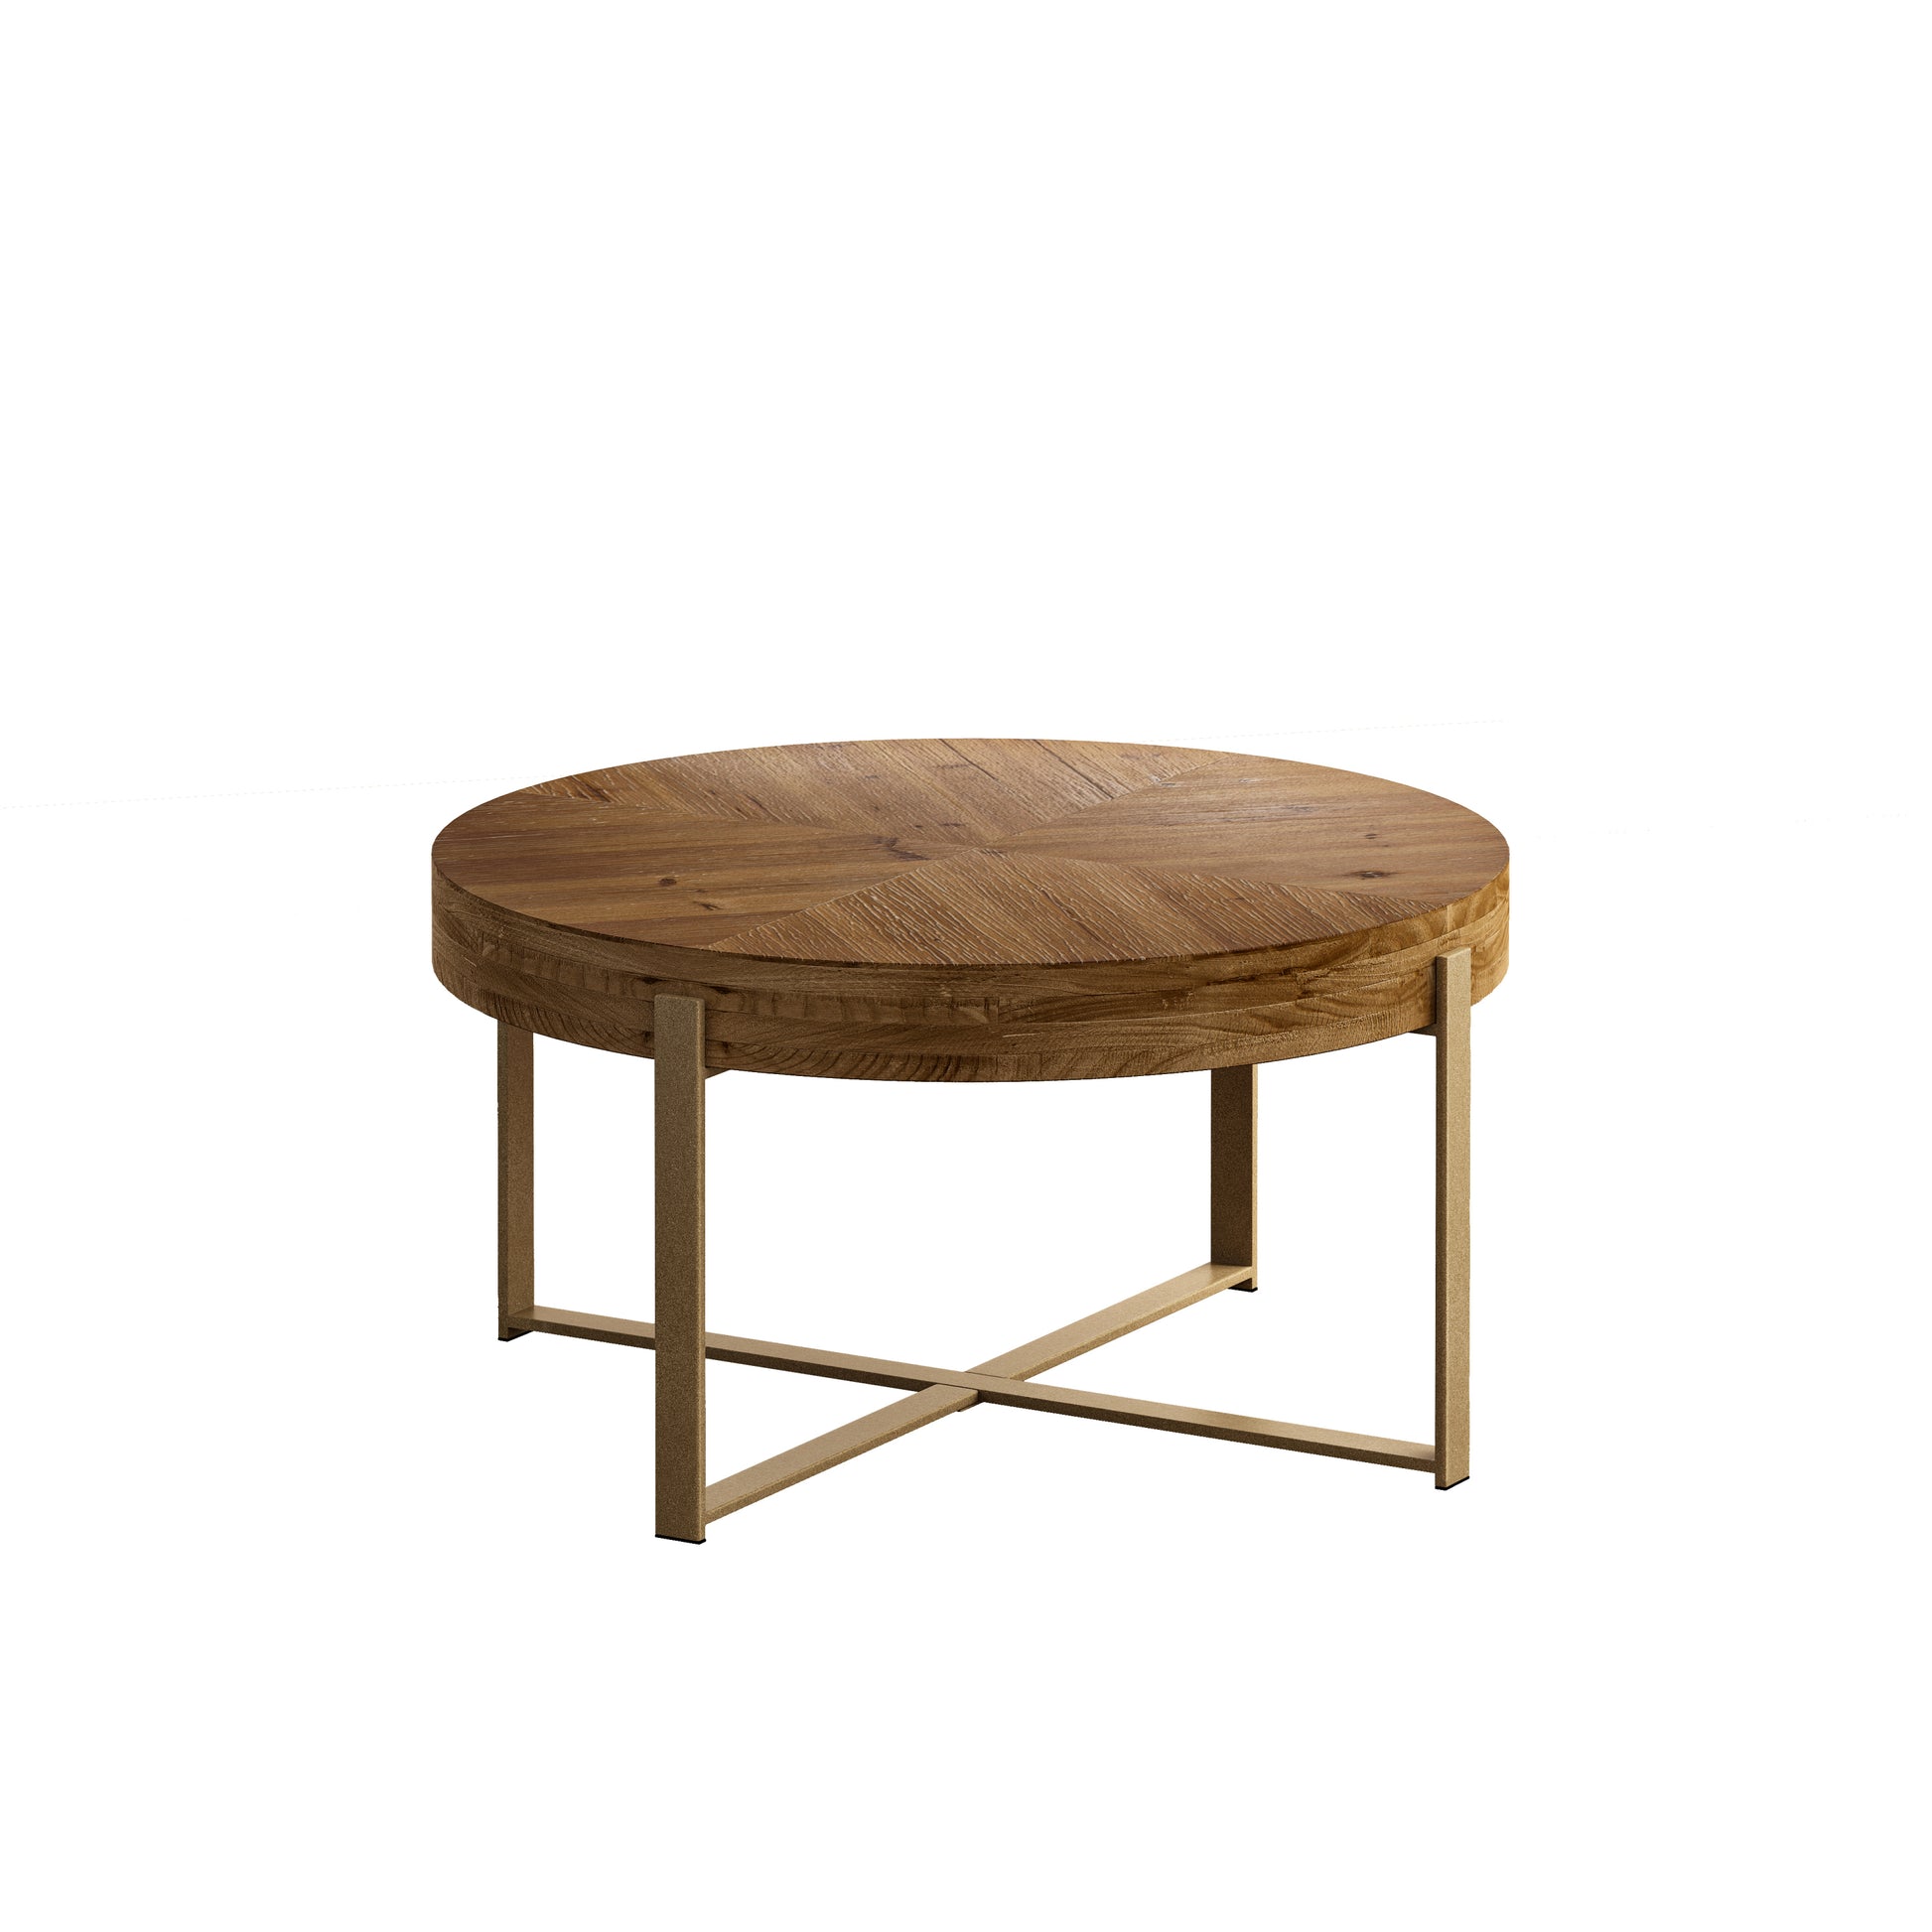 33.86"Modern Retro Splicing Round Coffee Table,Fir Wood Table Top with Gold Cross Legs Base - Enova Luxe Home Store